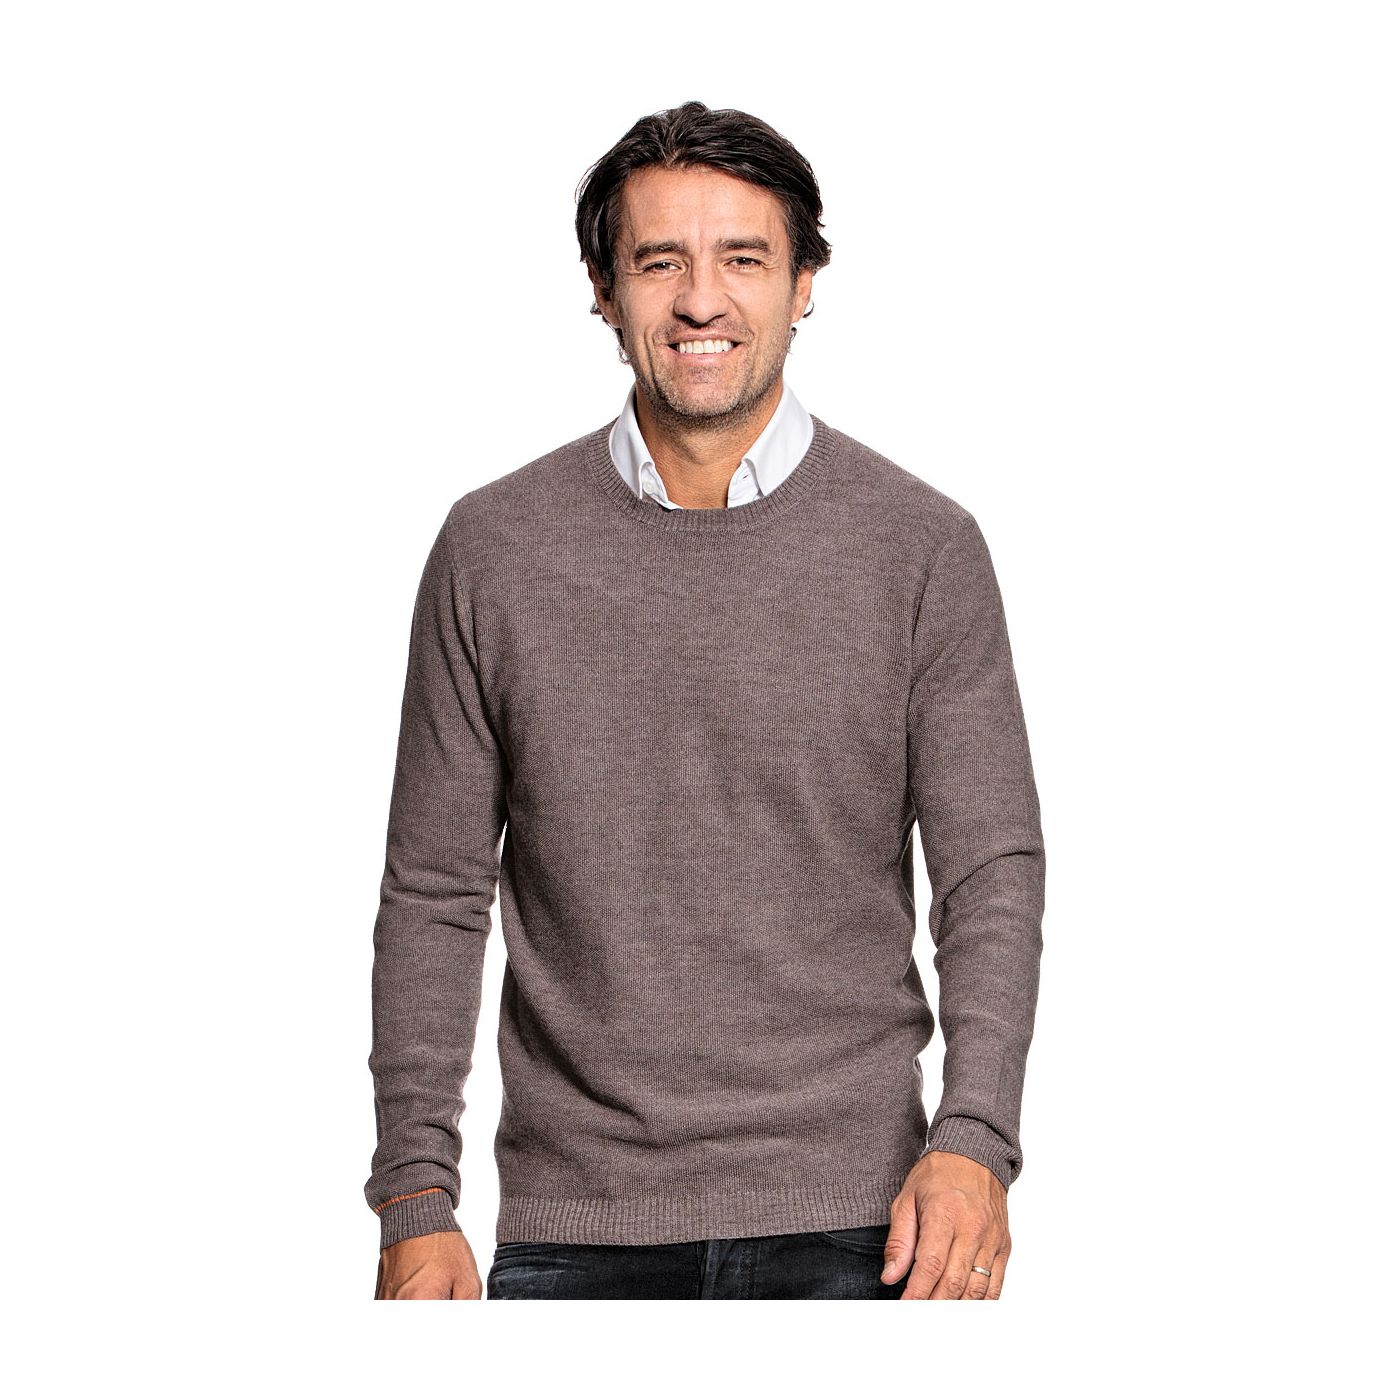 Honeycomb knit sweater for men made of Merino wool in Brown